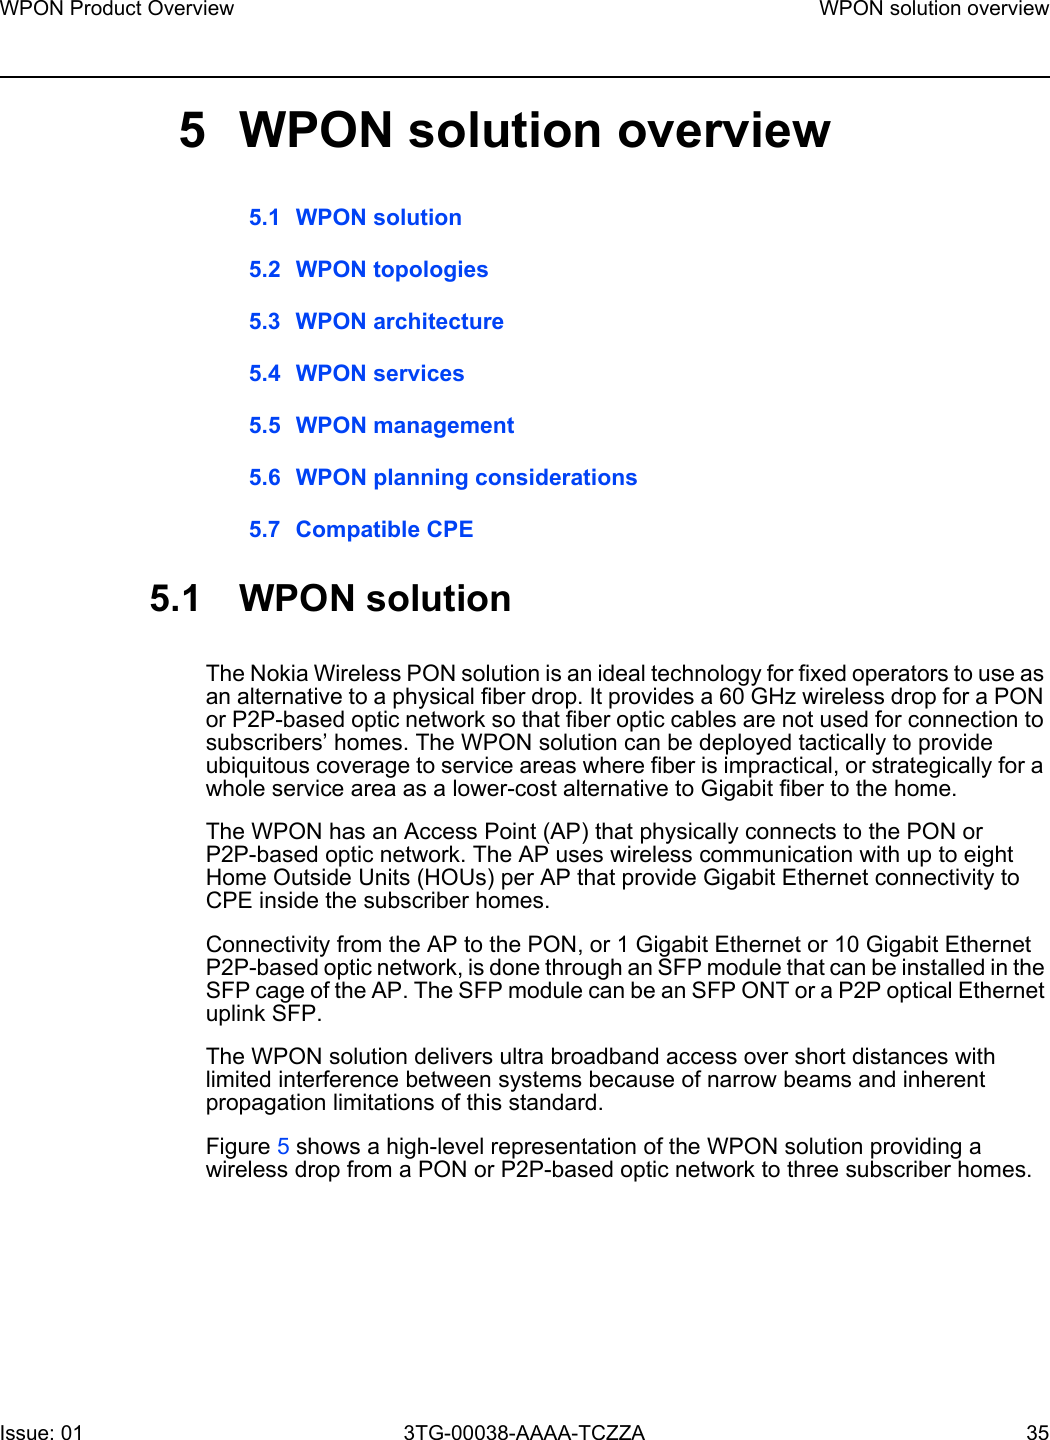 WPON Product Overview WPON solution overviewIssue: 01 3TG-00038-AAAA-TCZZA 35 5 WPON solution overview5.1 WPON solution5.2 WPON topologies5.3 WPON architecture5.4 WPON services5.5 WPON management5.6 WPON planning considerations5.7 Compatible CPE5.1 WPON solutionThe Nokia Wireless PON solution is an ideal technology for fixed operators to use as an alternative to a physical fiber drop. It provides a 60 GHz wireless drop for a PON or P2P-based optic network so that fiber optic cables are not used for connection to subscribers’ homes. The WPON solution can be deployed tactically to provide ubiquitous coverage to service areas where fiber is impractical, or strategically for a whole service area as a lower-cost alternative to Gigabit fiber to the home.The WPON has an Access Point (AP) that physically connects to the PON or P2P-based optic network. The AP uses wireless communication with up to eight Home Outside Units (HOUs) per AP that provide Gigabit Ethernet connectivity to CPE inside the subscriber homes. Connectivity from the AP to the PON, or 1 Gigabit Ethernet or 10 Gigabit Ethernet P2P-based optic network, is done through an SFP module that can be installed in the SFP cage of the AP. The SFP module can be an SFP ONT or a P2P optical Ethernet uplink SFP.The WPON solution delivers ultra broadband access over short distances with limited interference between systems because of narrow beams and inherent propagation limitations of this standard.Figure 5 shows a high-level representation of the WPON solution providing a wireless drop from a PON or P2P-based optic network to three subscriber homes.